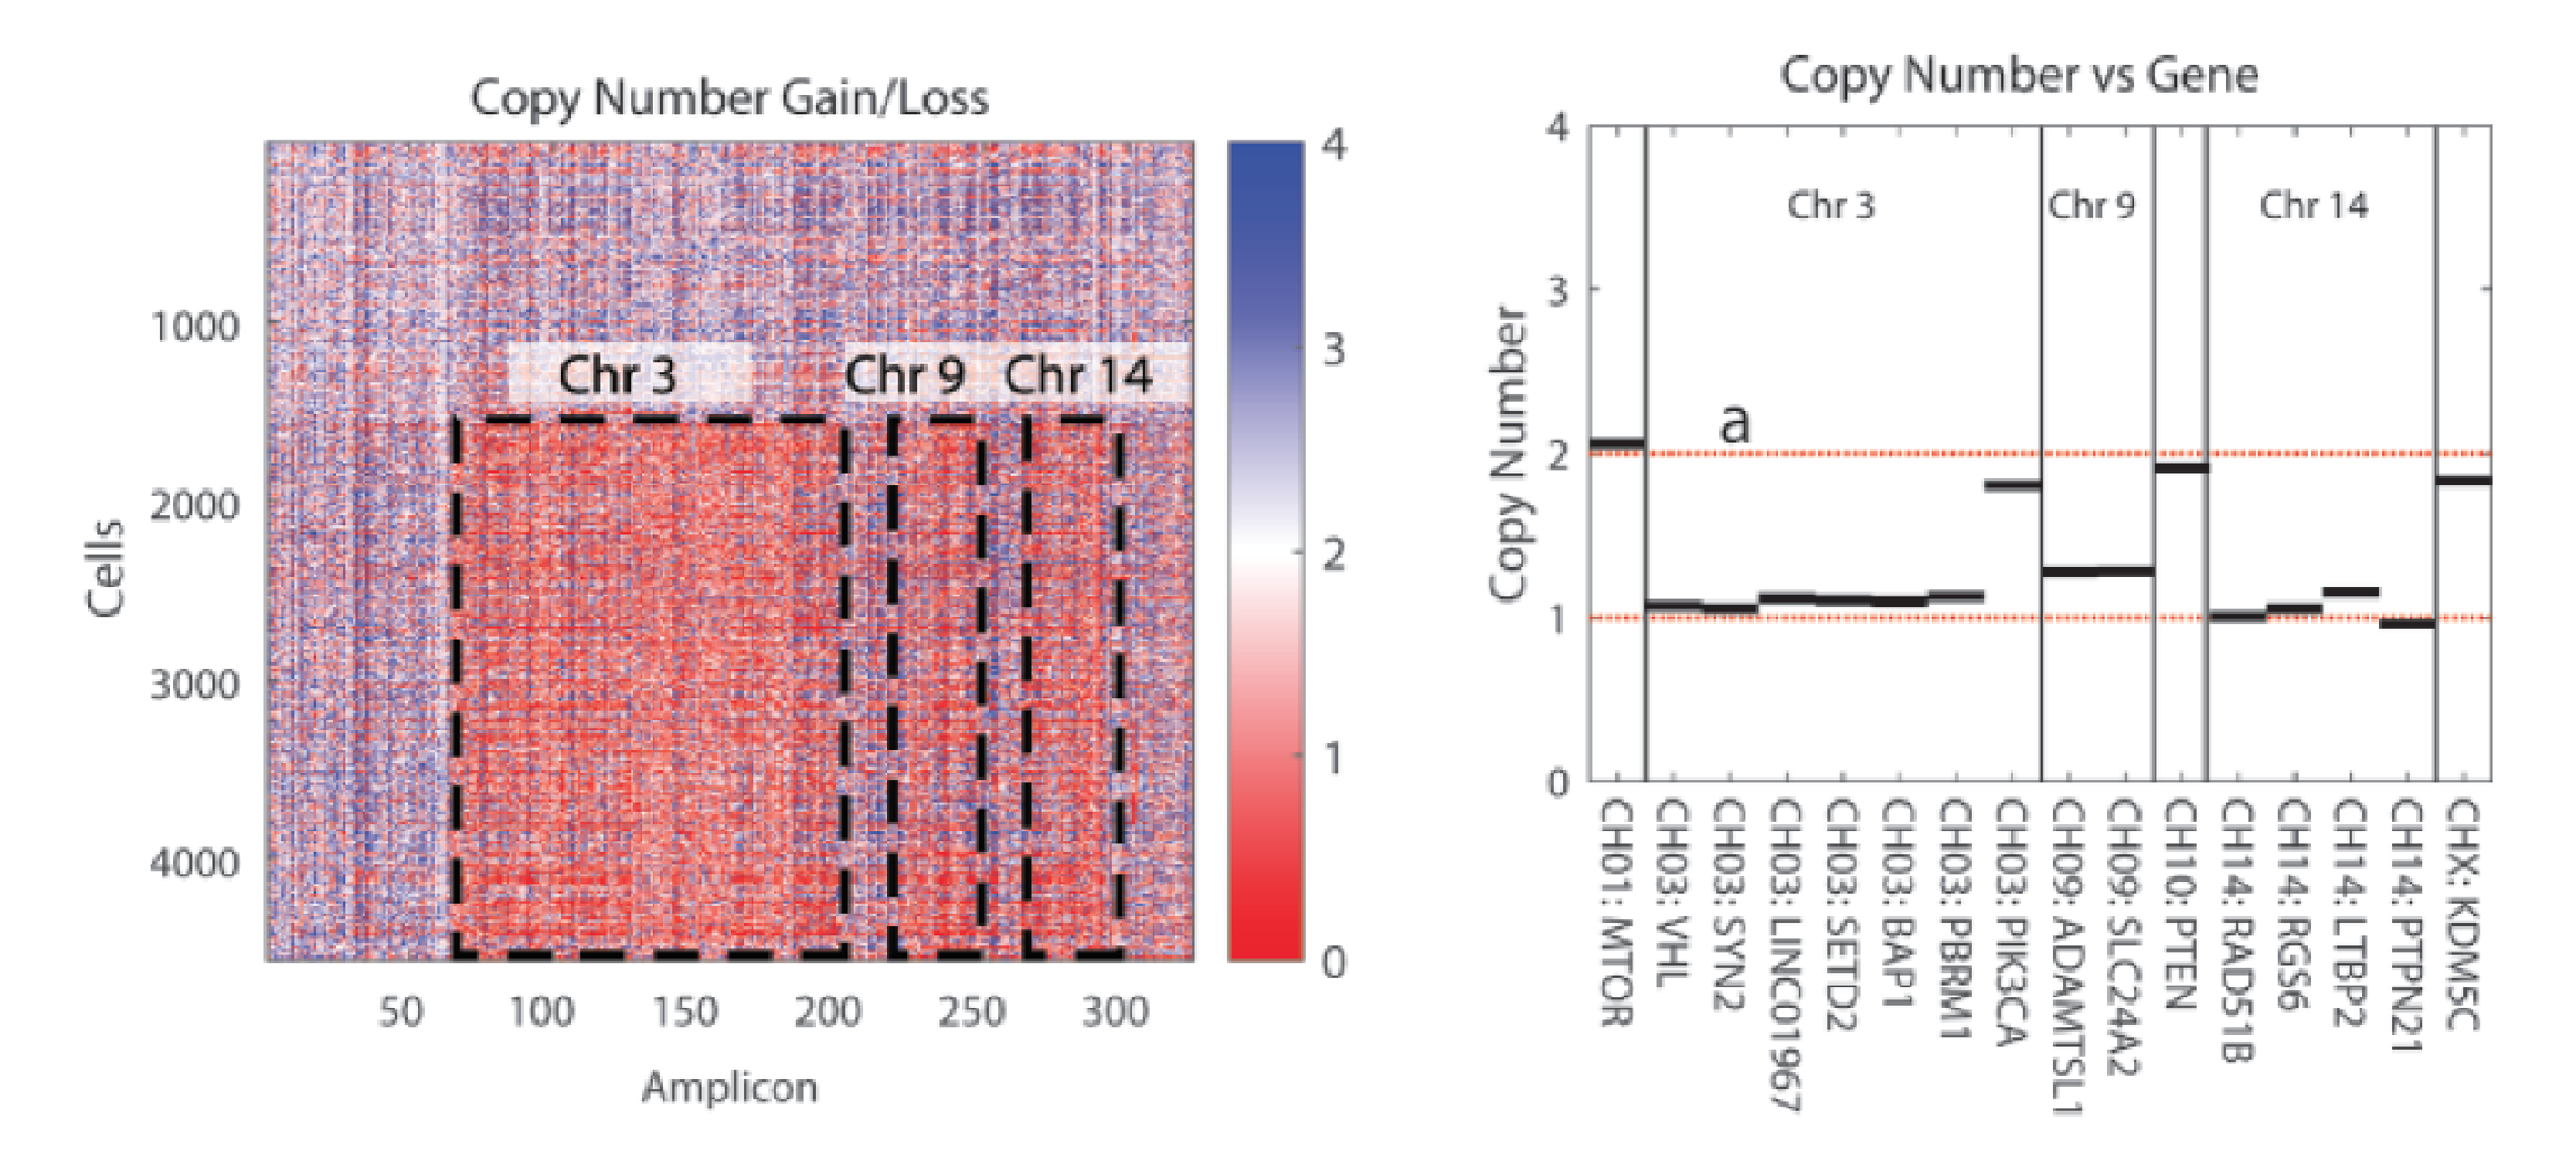 Measure gene and chromosome-level CNVs along with SNVs/indels and protein expression